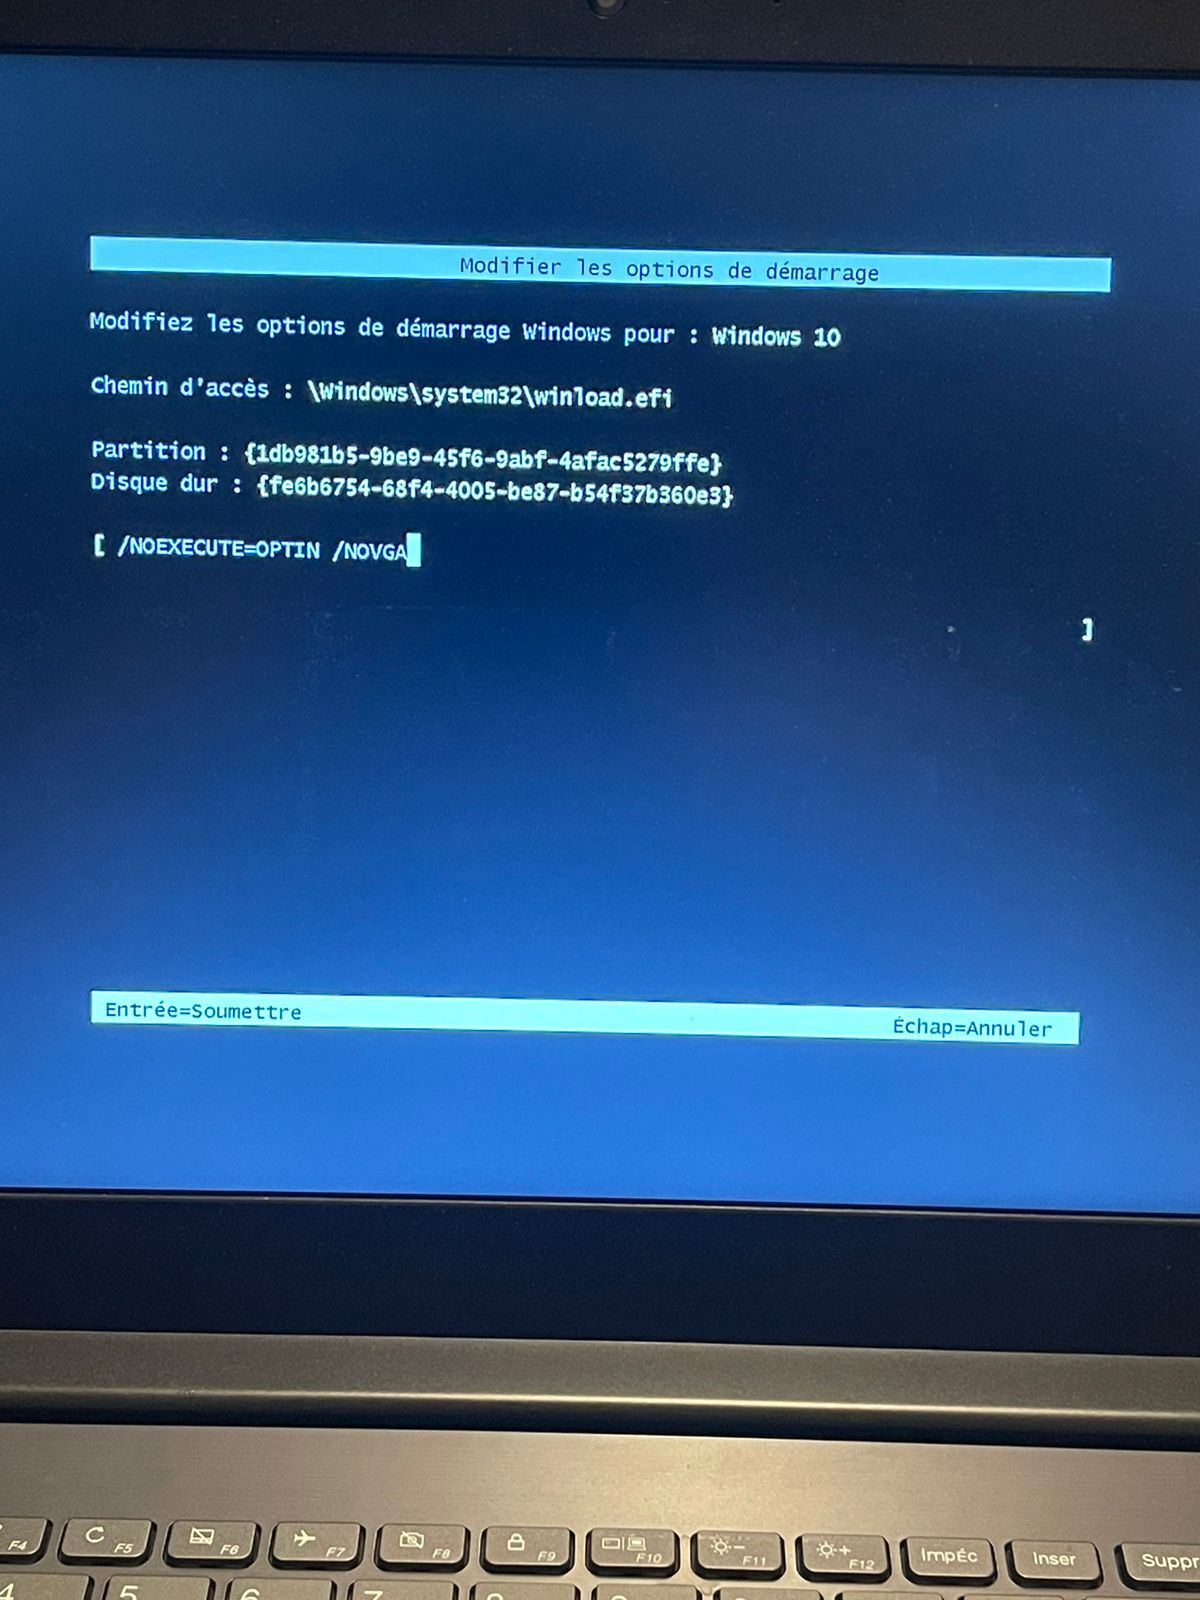 Problem-with-my-lenovo-stuck-in-the-boot-manager-and-the-keyboard-won-t-work-to-boot-it  - English Community - LENOVO COMMUNITY